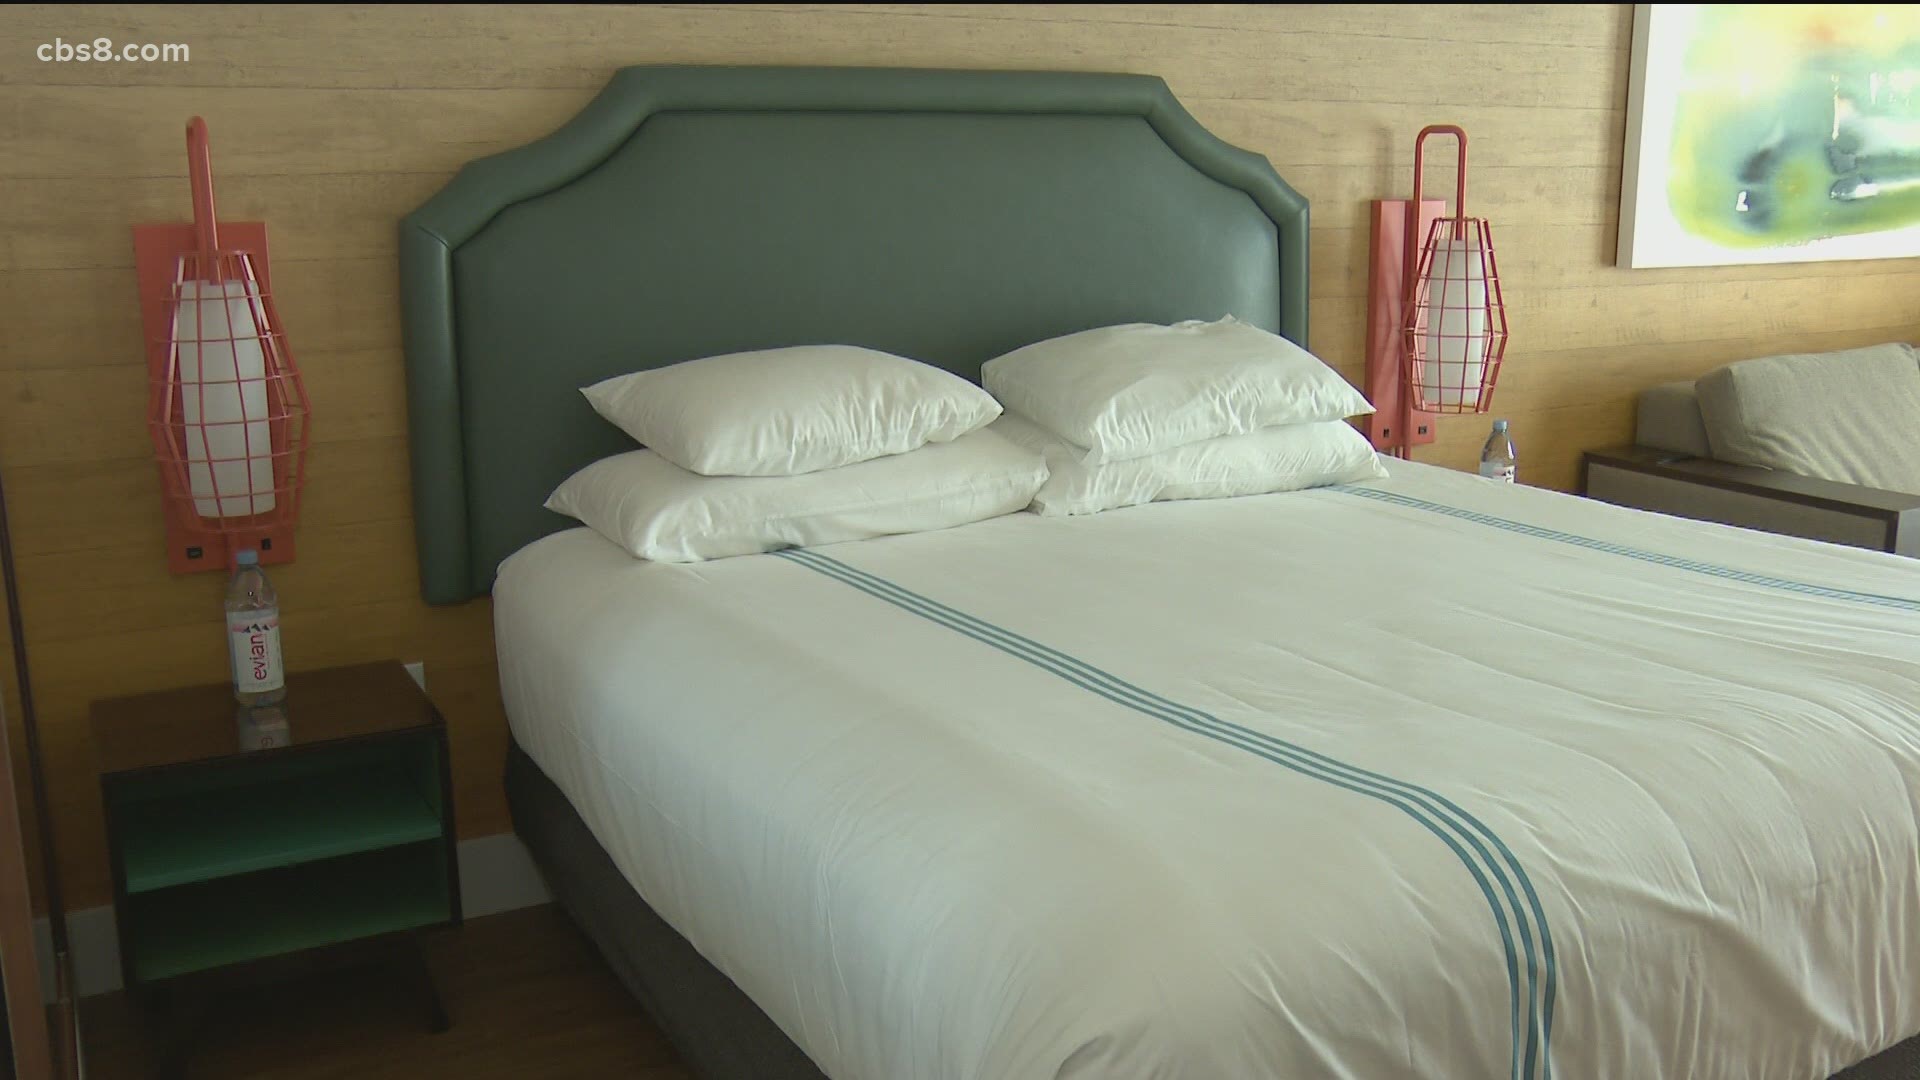 Friday is reopening day for San Diego hotel and resorts, but guests will notice big changes due to strict county and state COVID-19 guidelines.